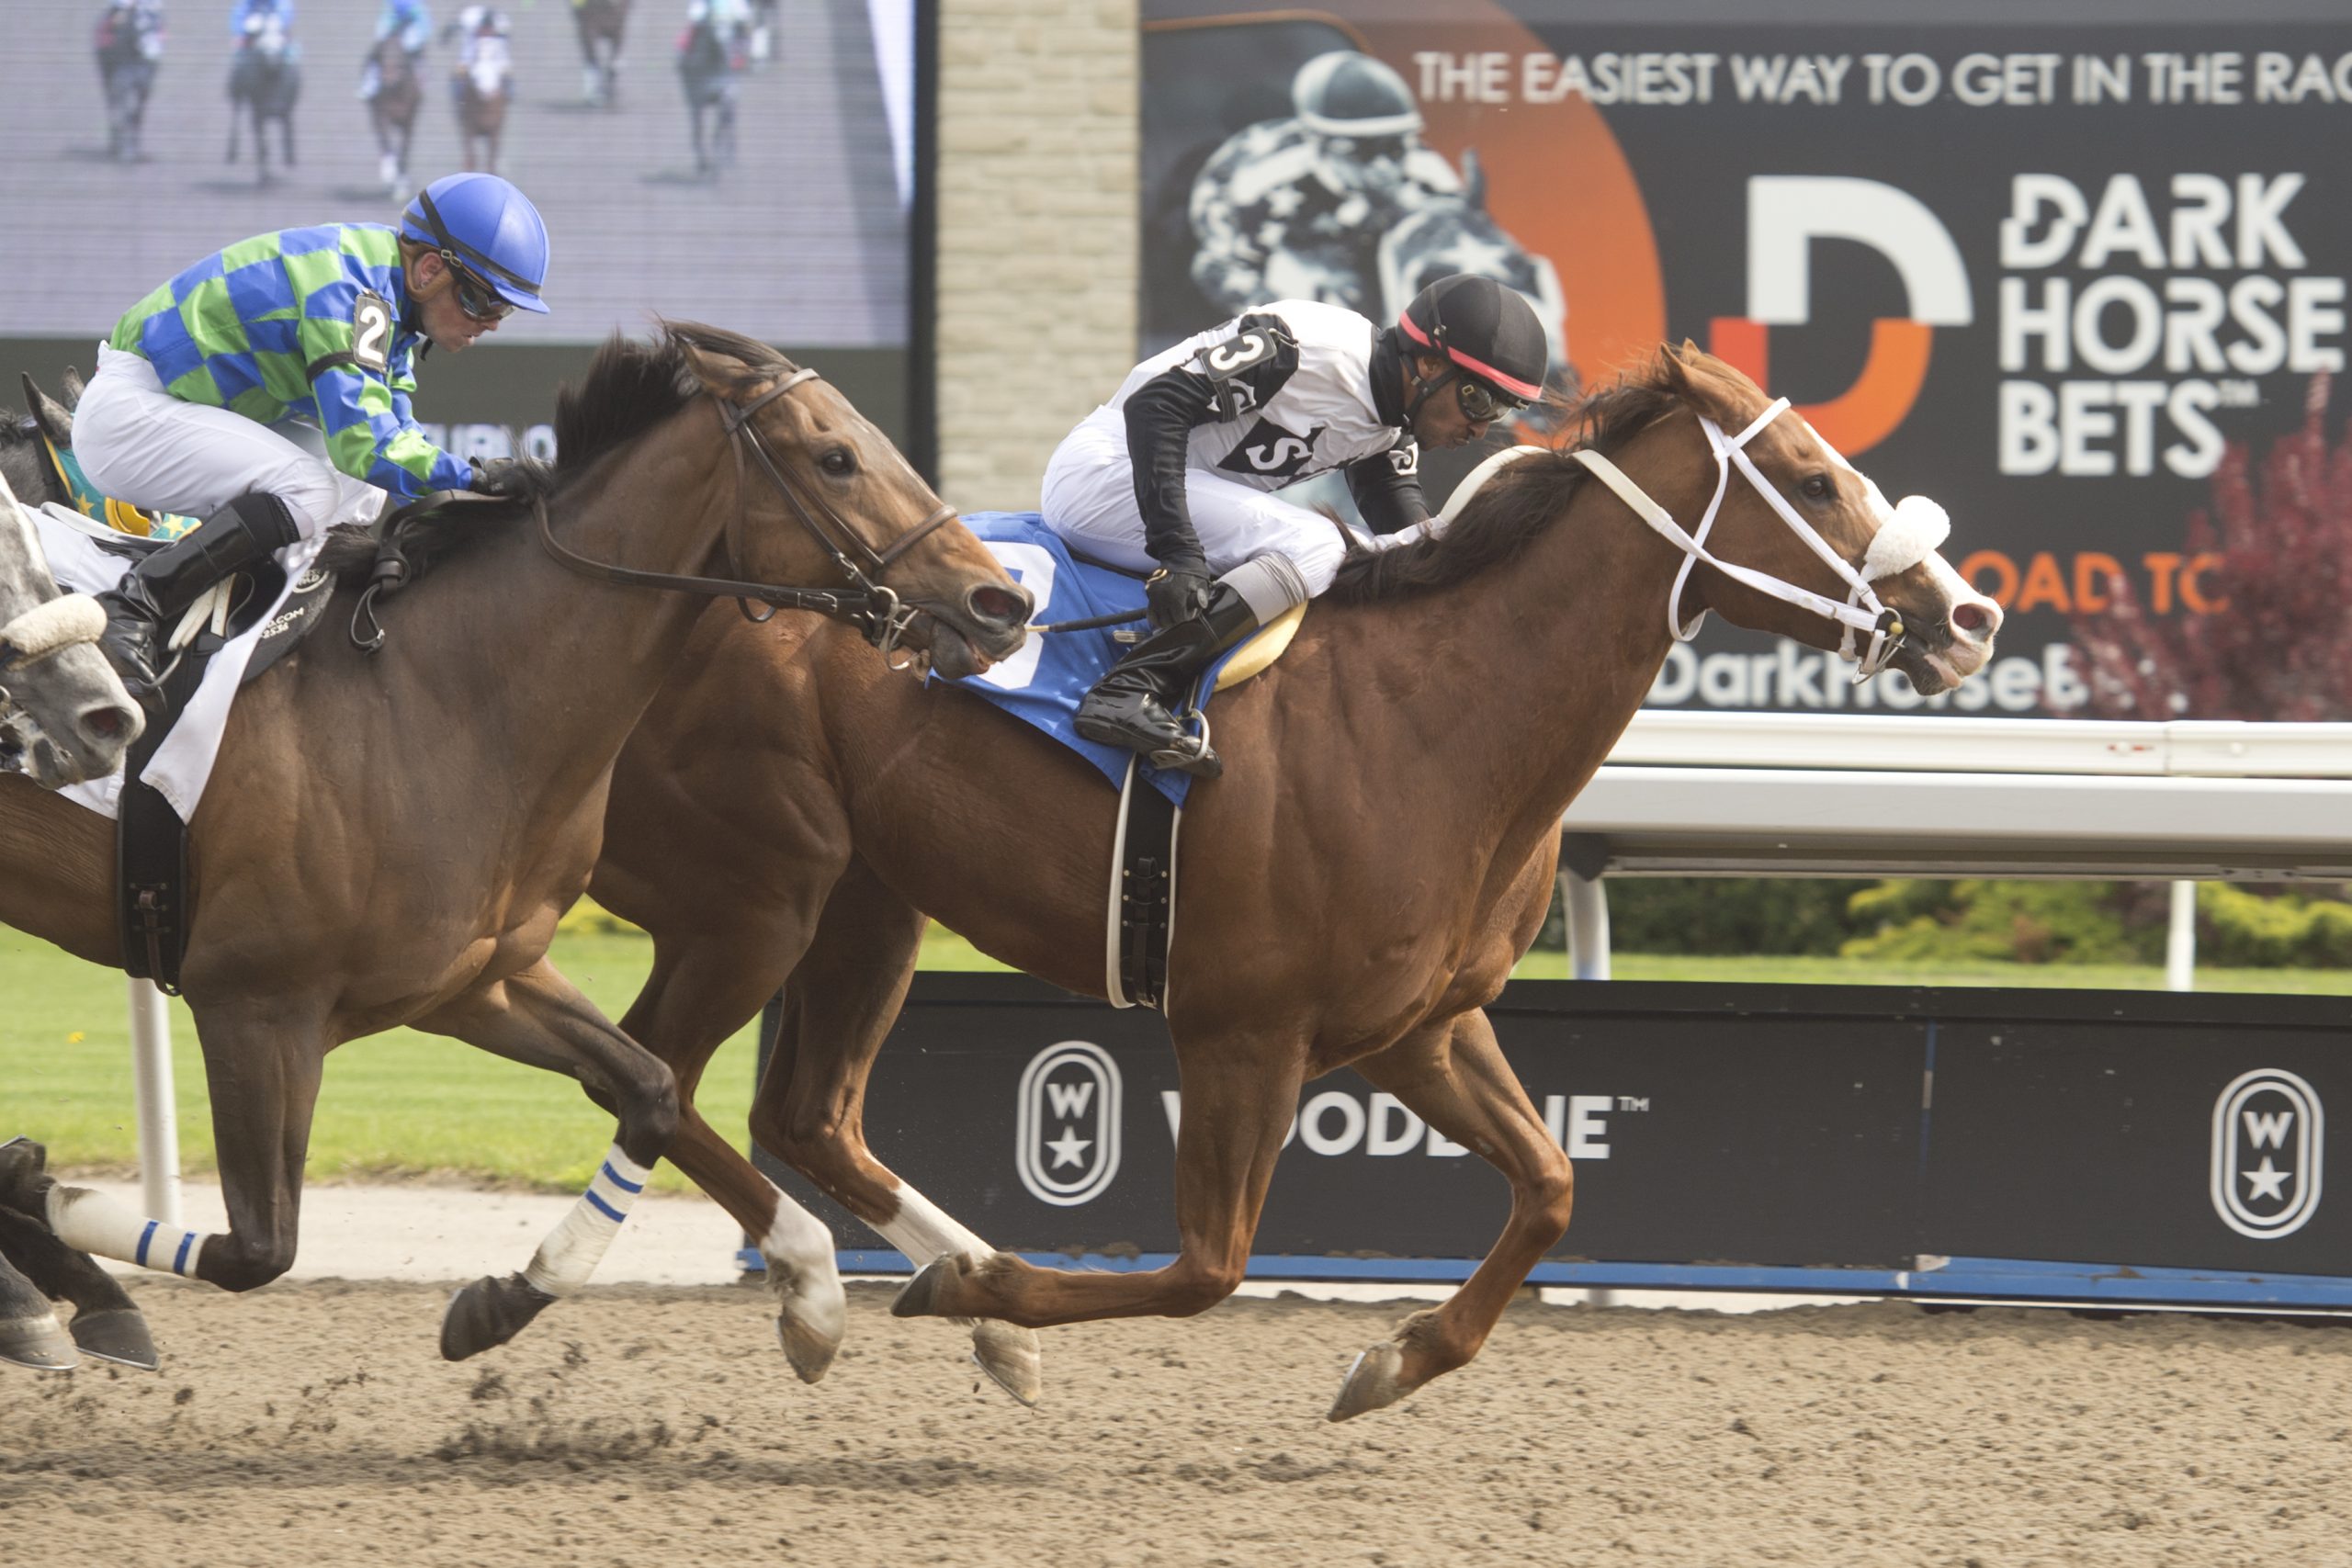 woodbine and other tracks have exciting horse racing to go along with the Breeders' Cup